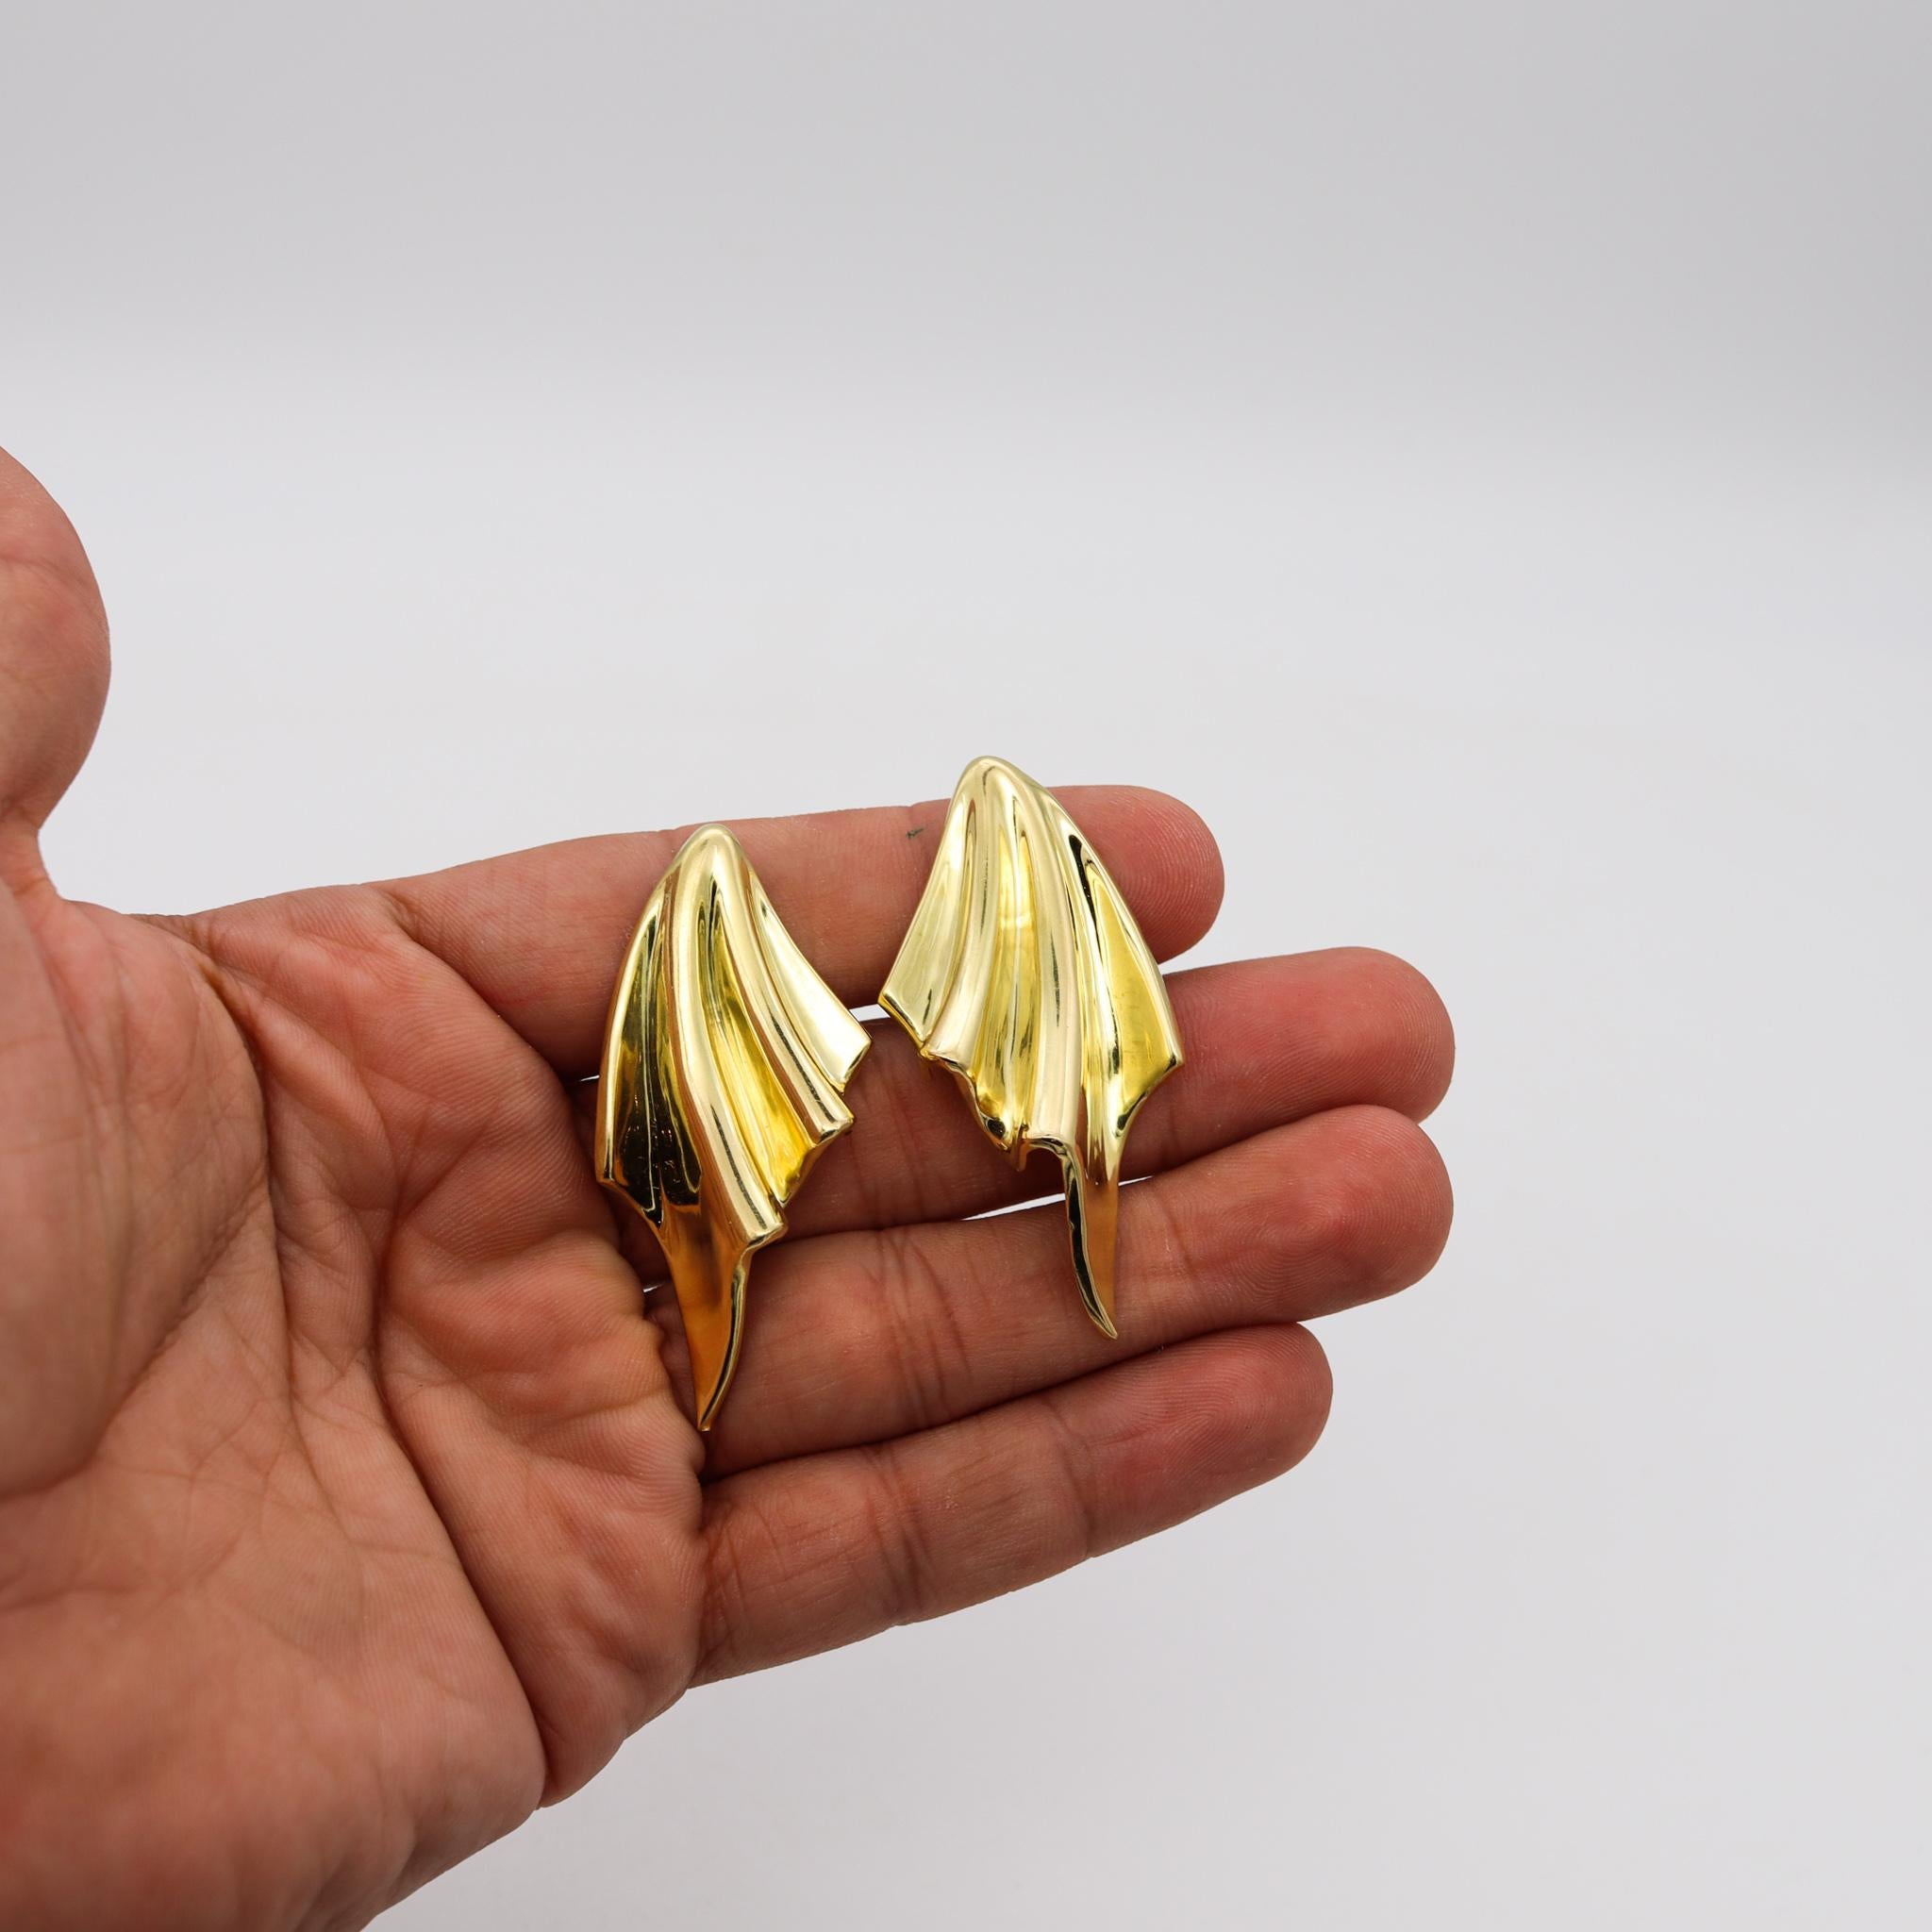 Contemporary Roberto Legnazzi 1970 Modernism Drapery Clips Earrings in 18Kt Yellow Gold For Sale